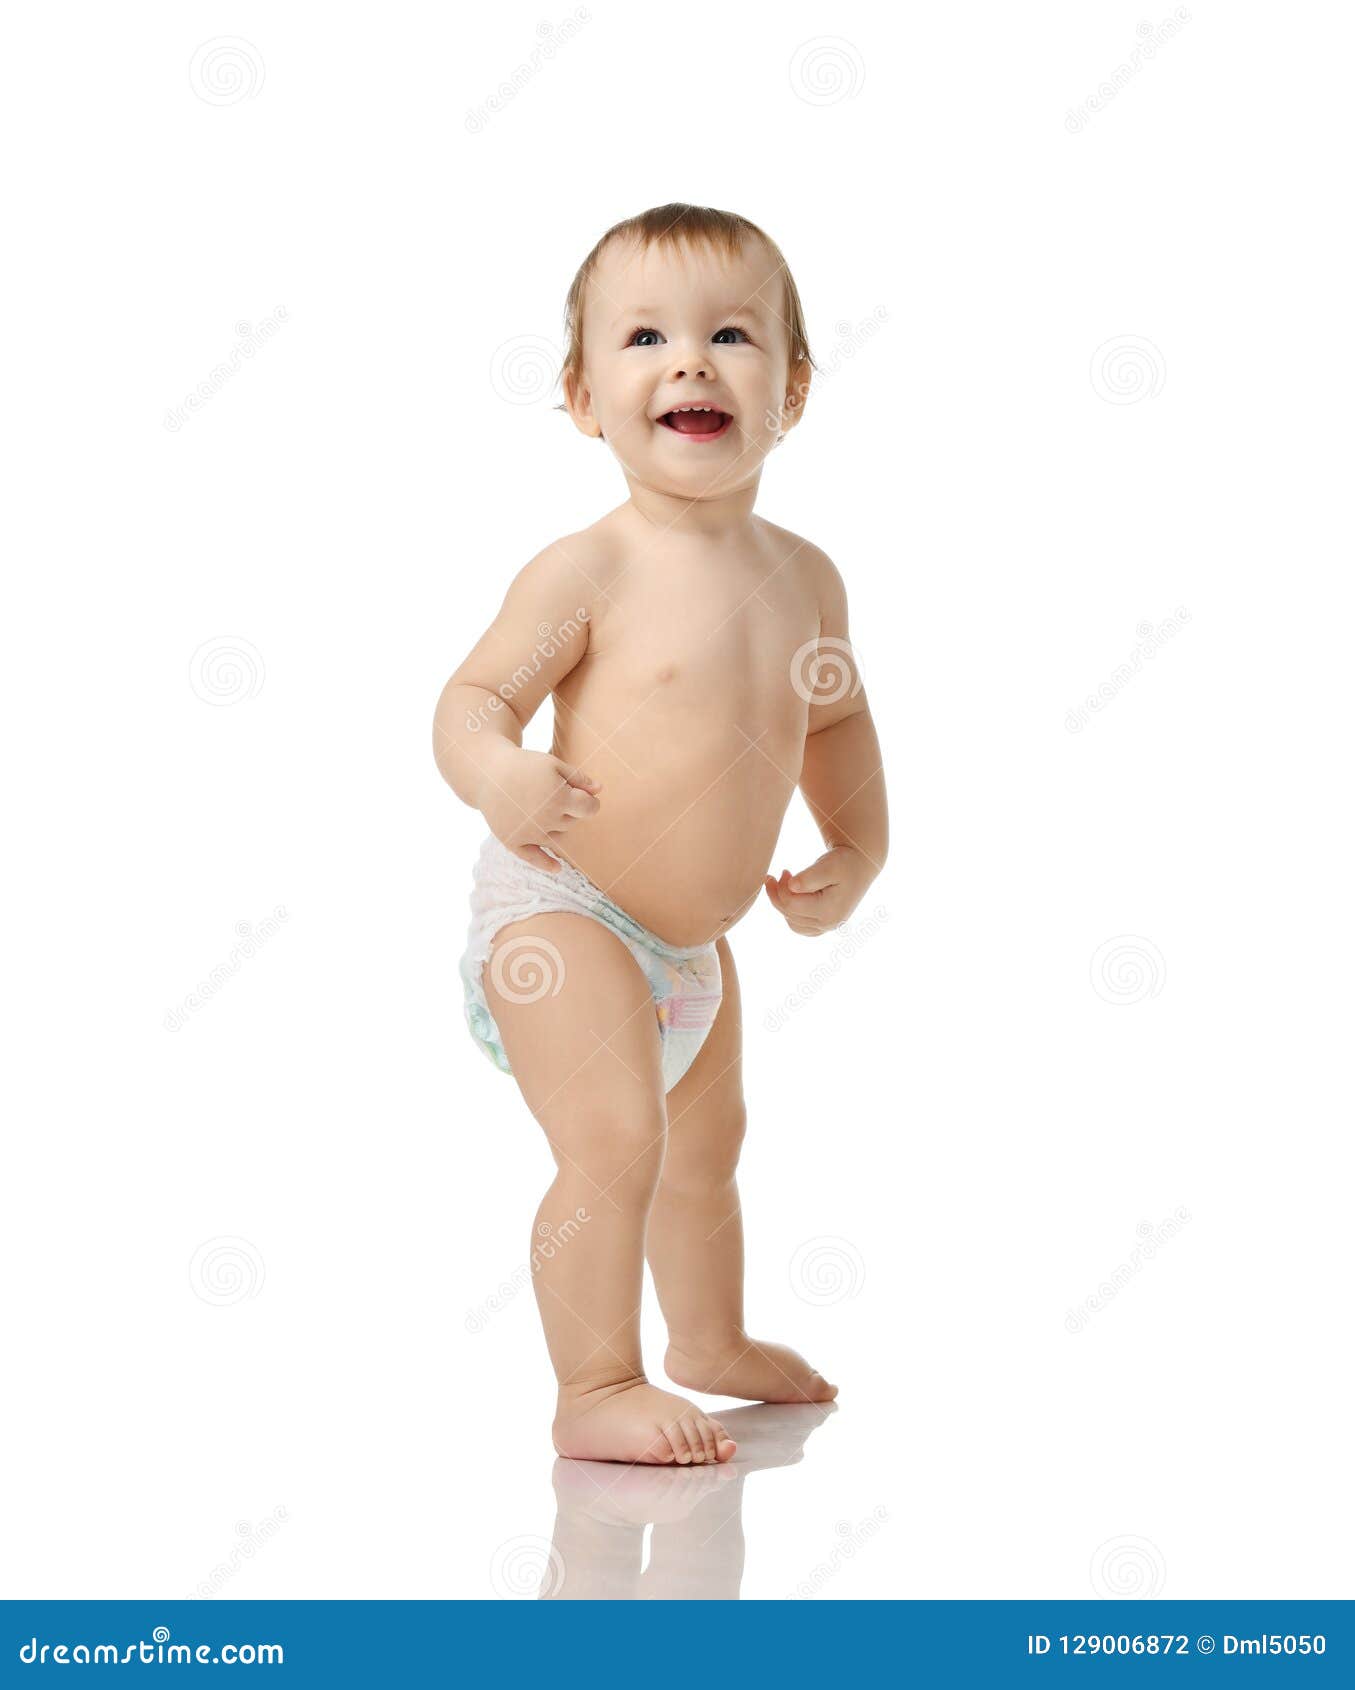 infant child baby girl kid toddler in diaper make first steps standing happy smiling laughing  on a white